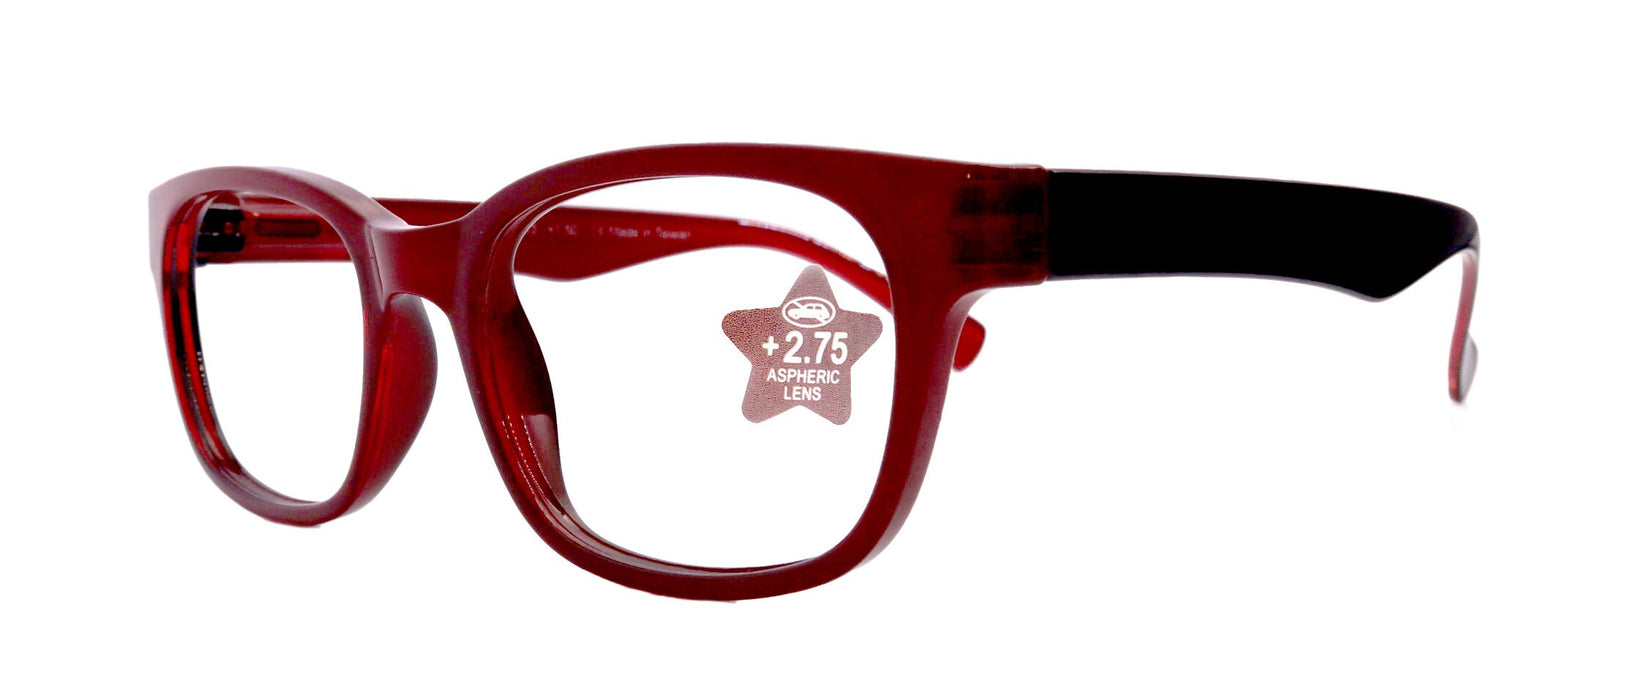 Rita, Premium Reading Glasses High End Reading Glass +1.50 to +6 Magnifying Eyeglasses (Square) (Red) Optical Frames-NYR211013_000